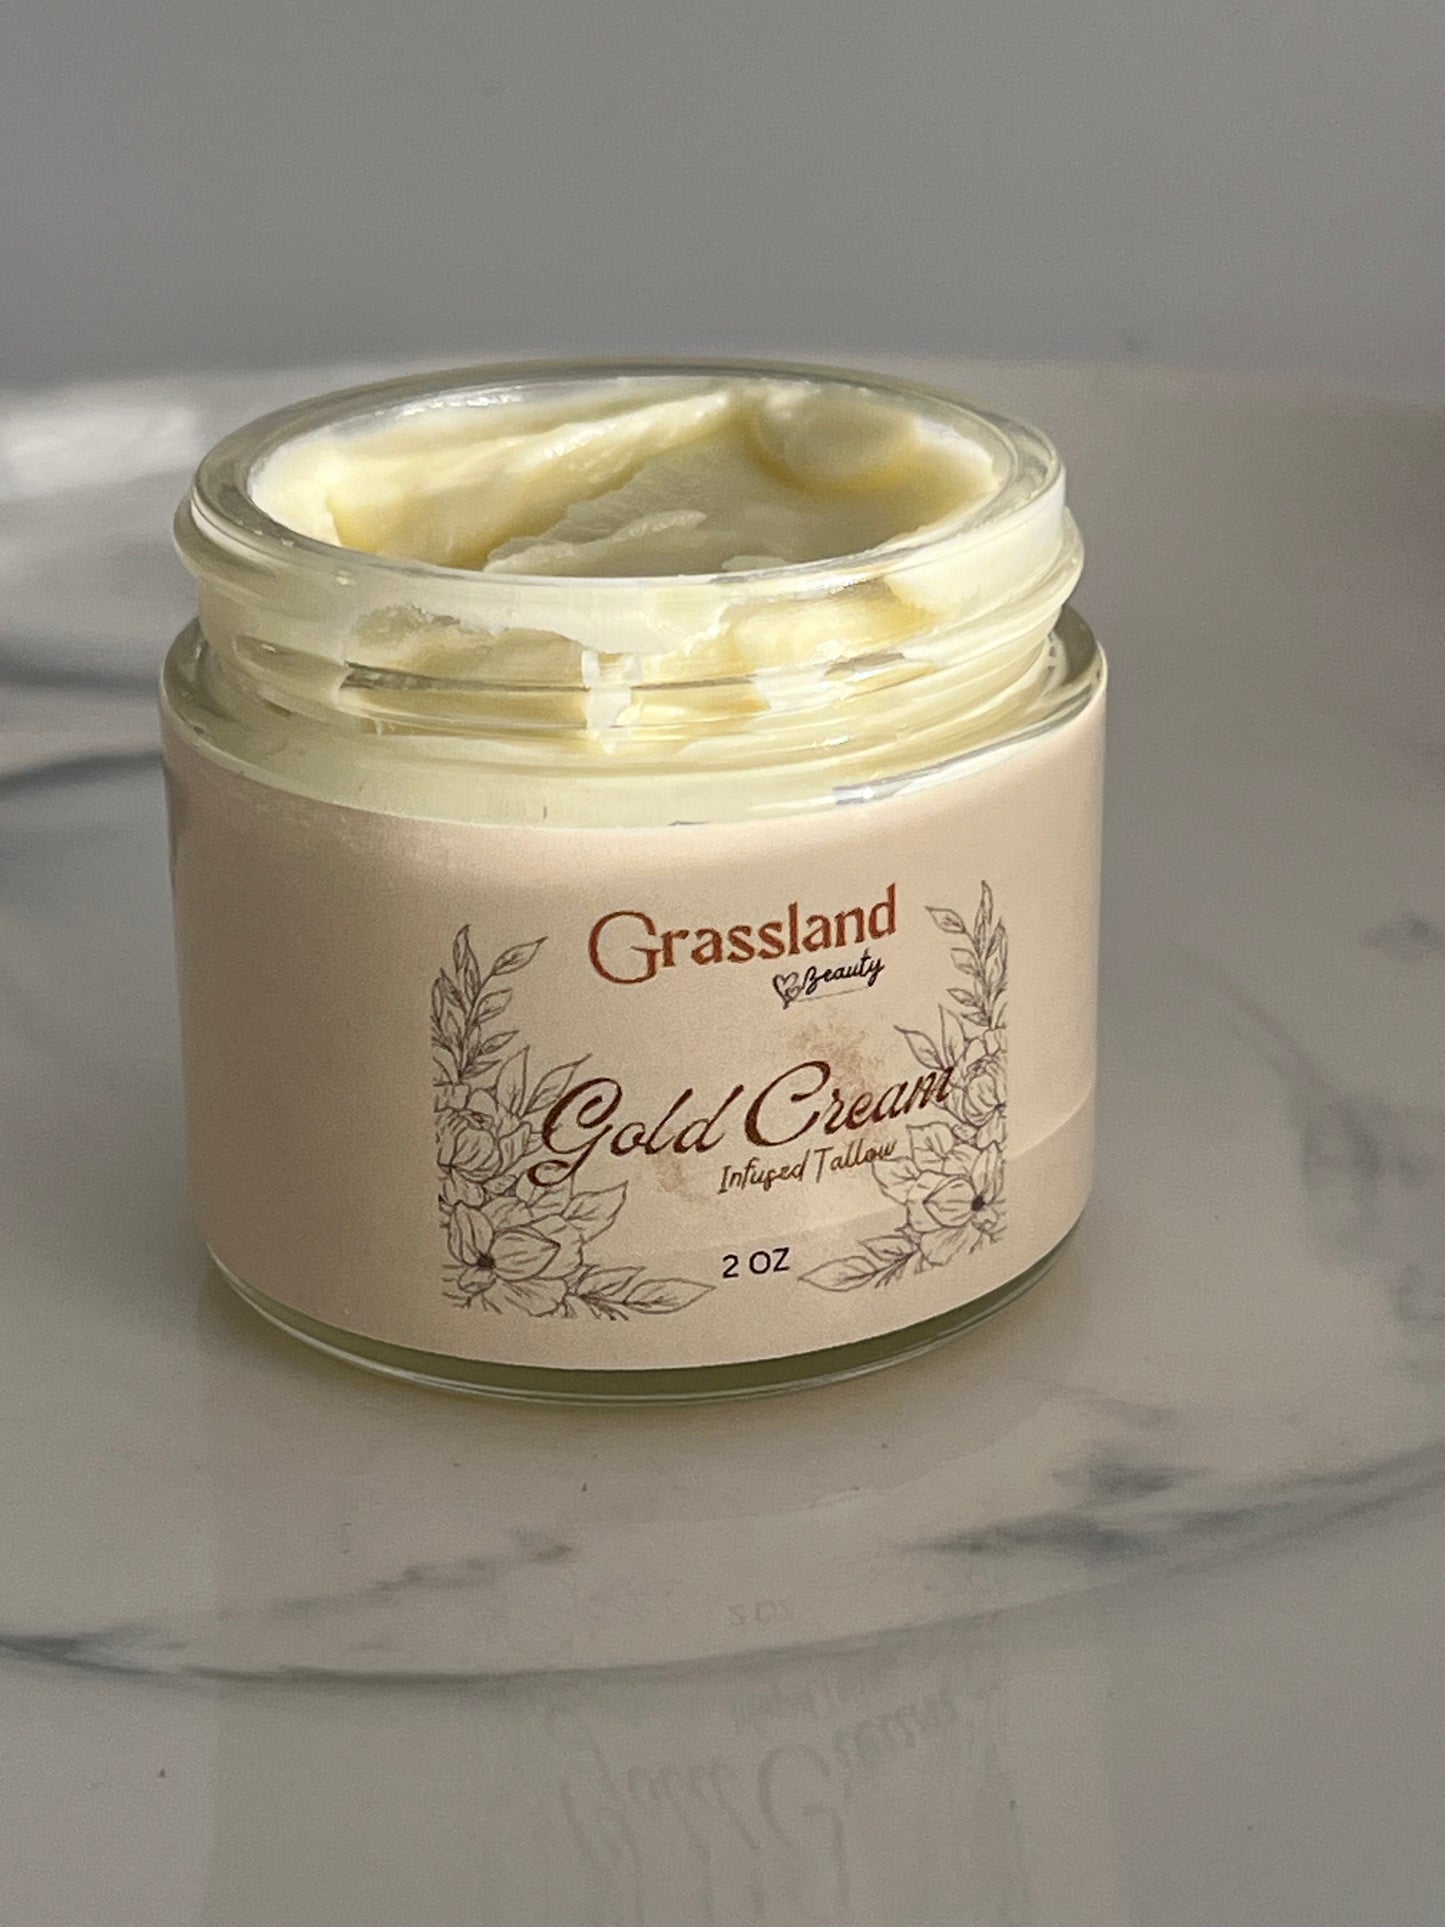 Gold Cream Infused Tallow Bestseller